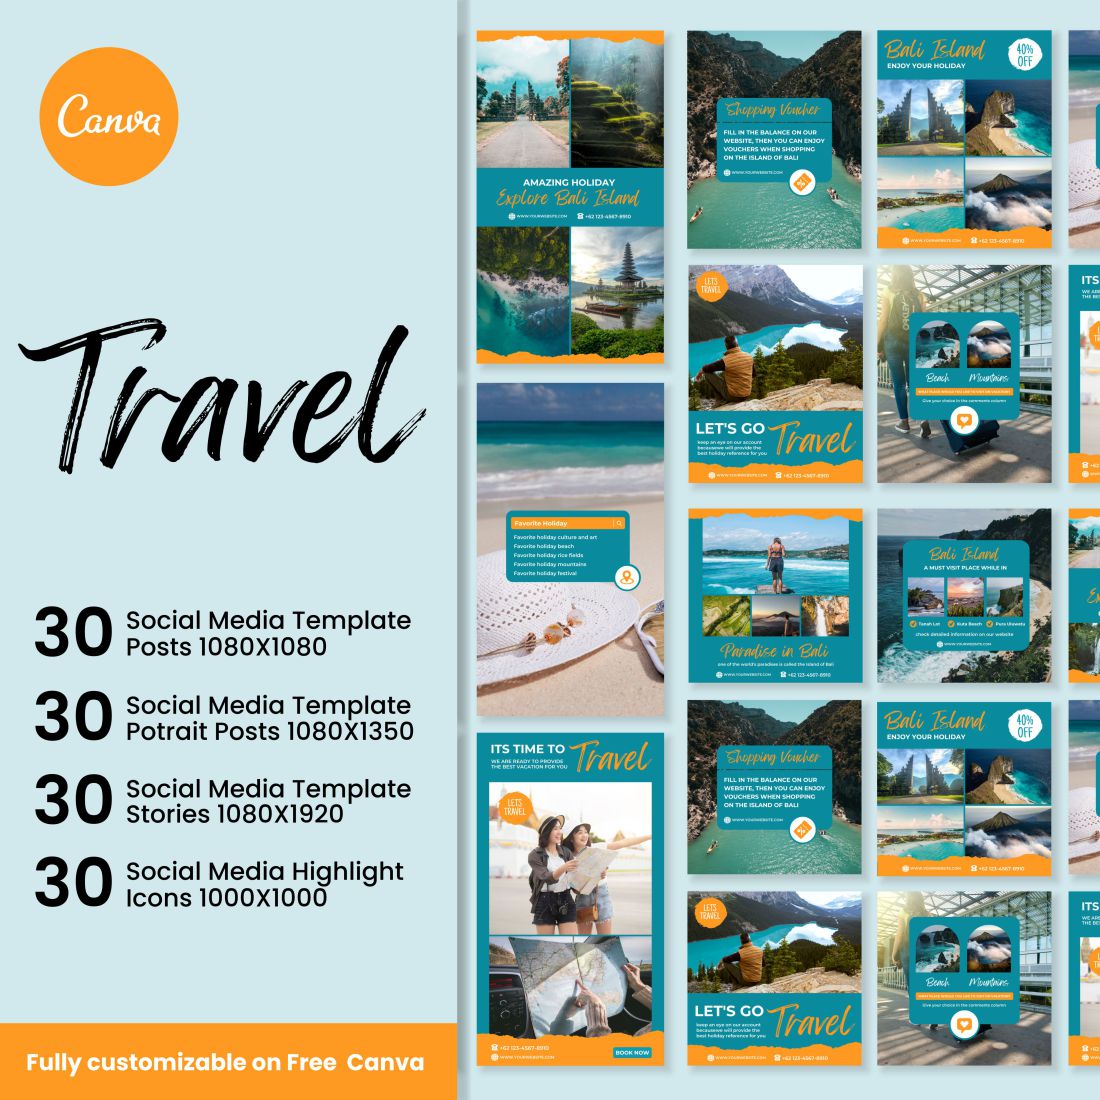 Travel Agency Canva Instagram Template Cover Image.